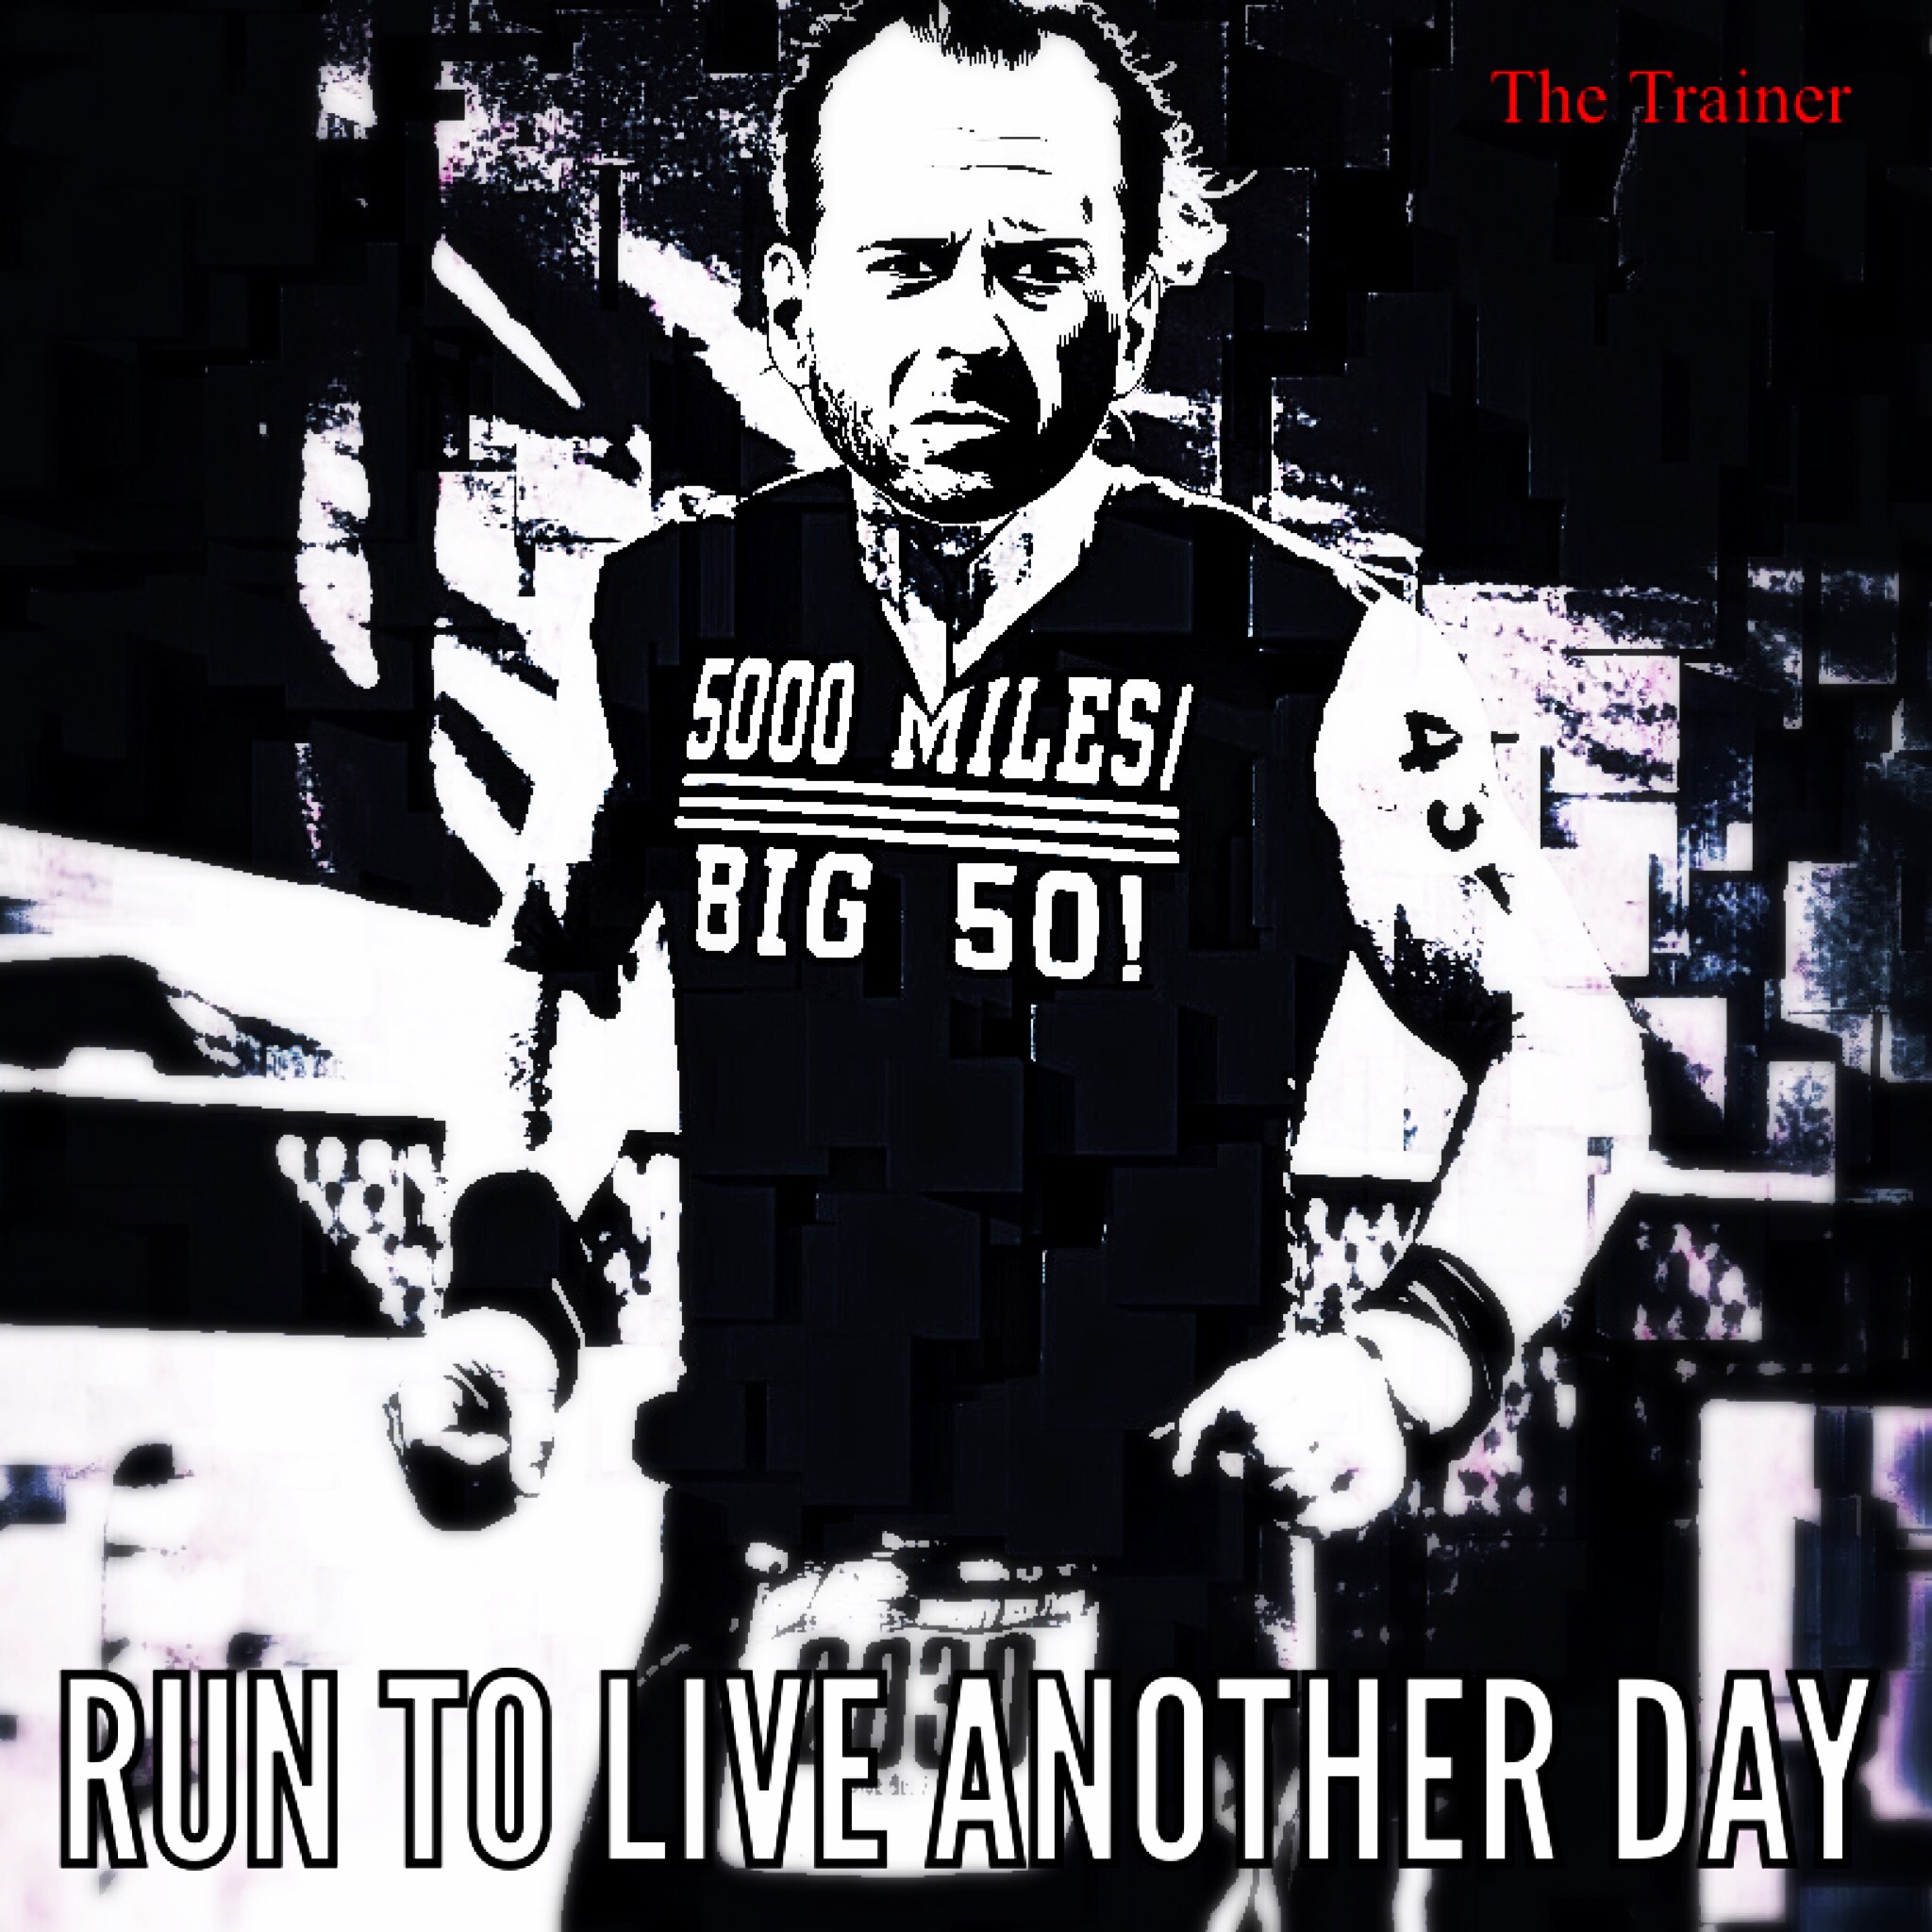 Run to live another day. The Trainer 